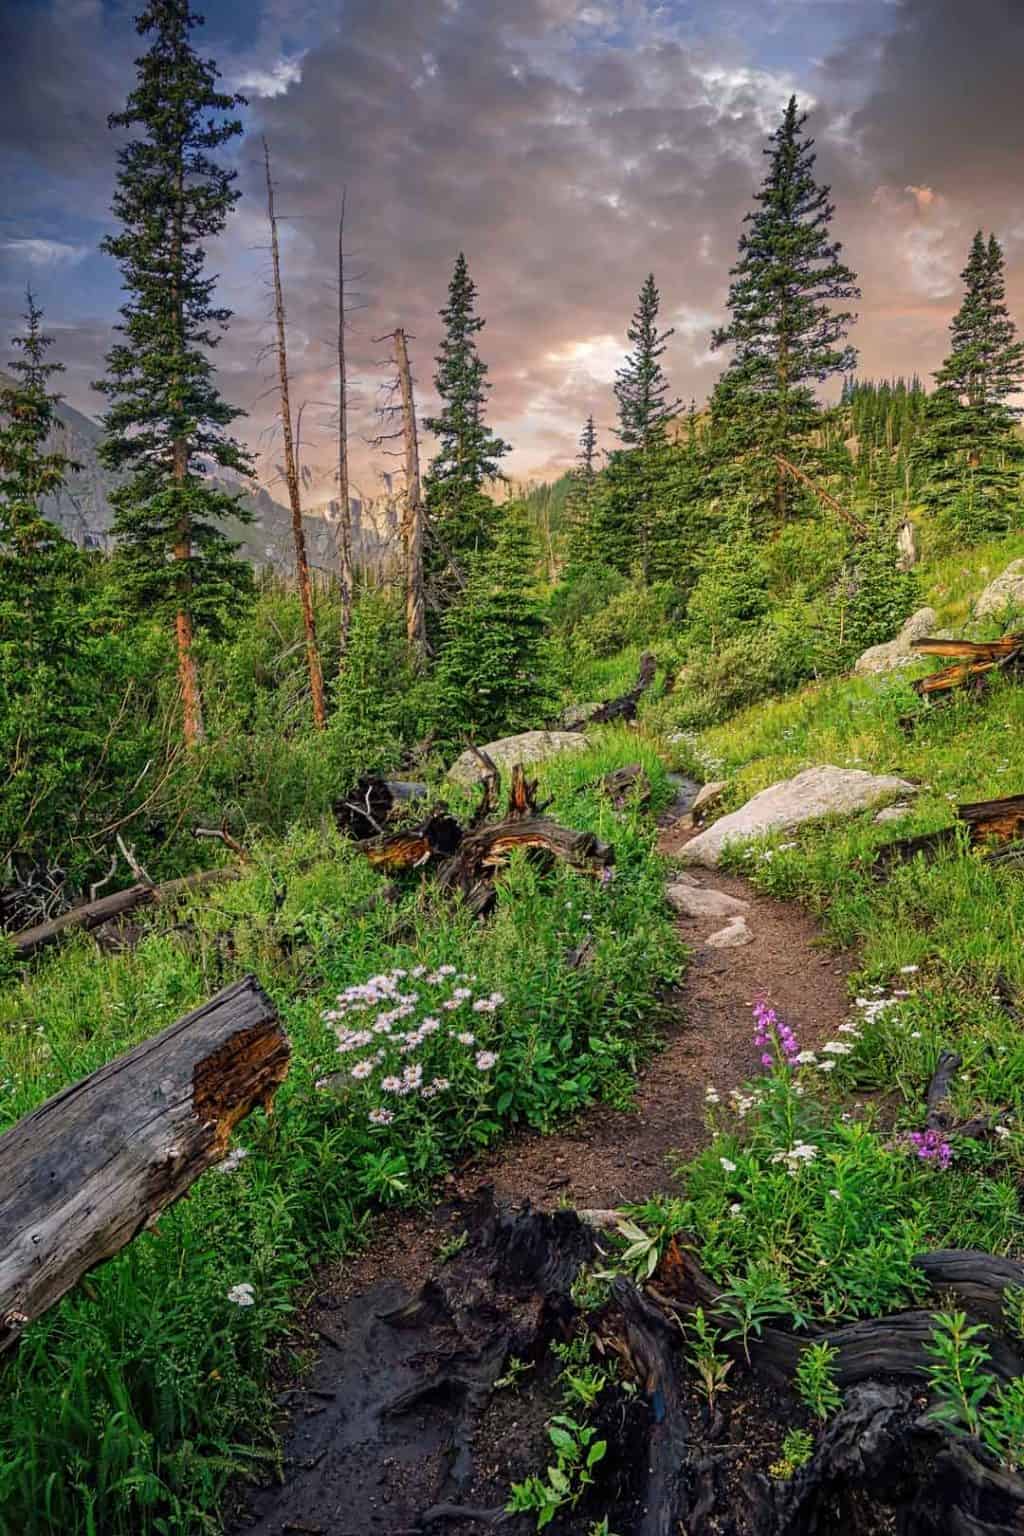 Early morning light illuminates the sky and beautiful wildflowers along the Chicago Lakes trail in the Mt. Evans Wilderness.